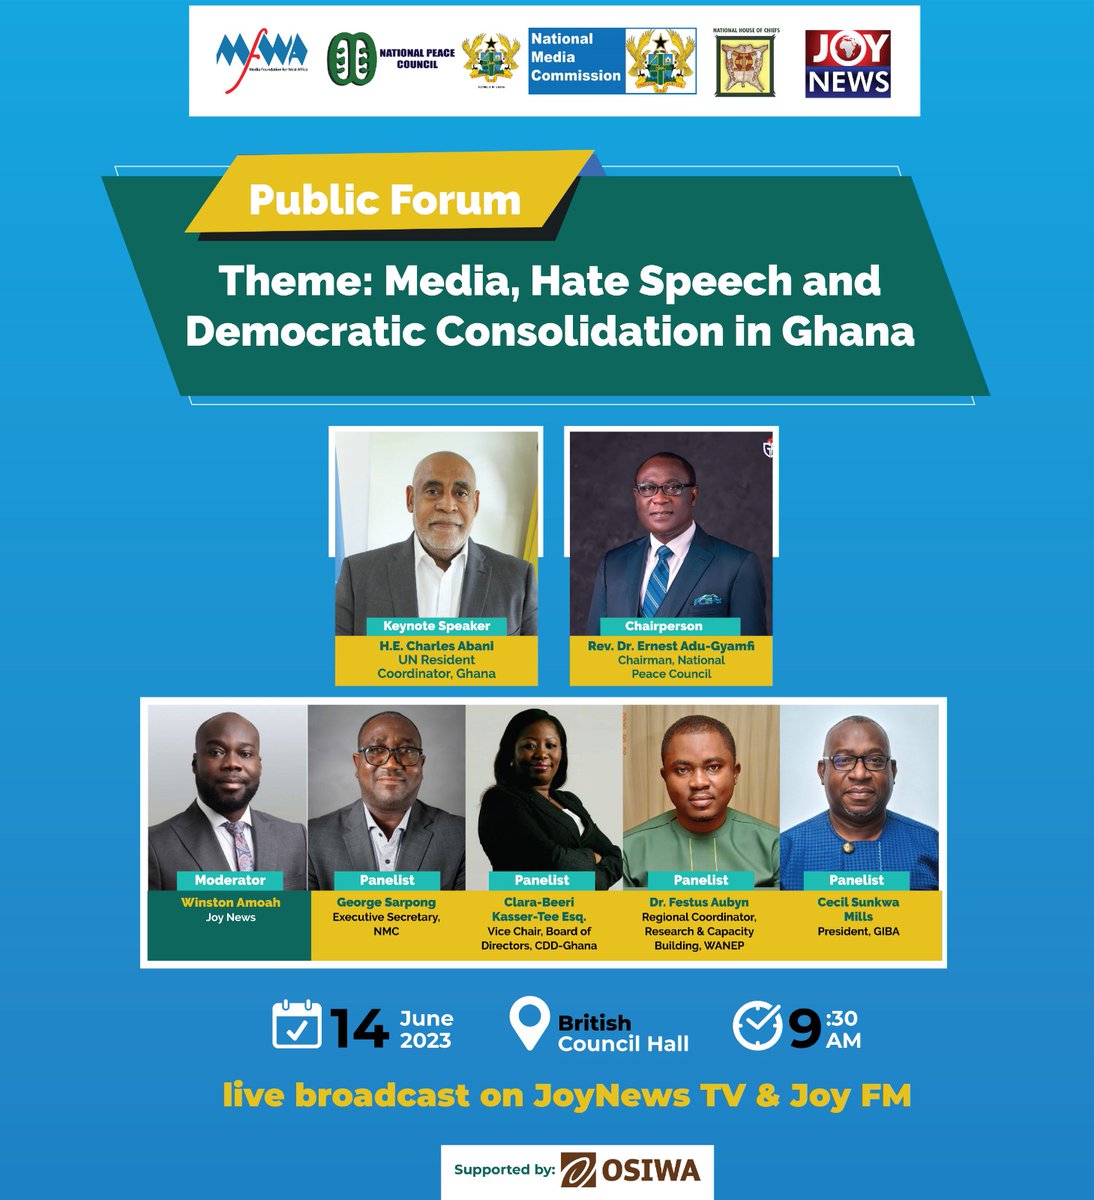 Chairman of @PeaceCouncilGh, Rev. Dr. Ernest Adu-Gyamfi is the Chairperson for the Public Forum on Media, Hate Speech and Democratic Consolidation in Ghana. Make a date! #Forumonhatespeech #MFWA